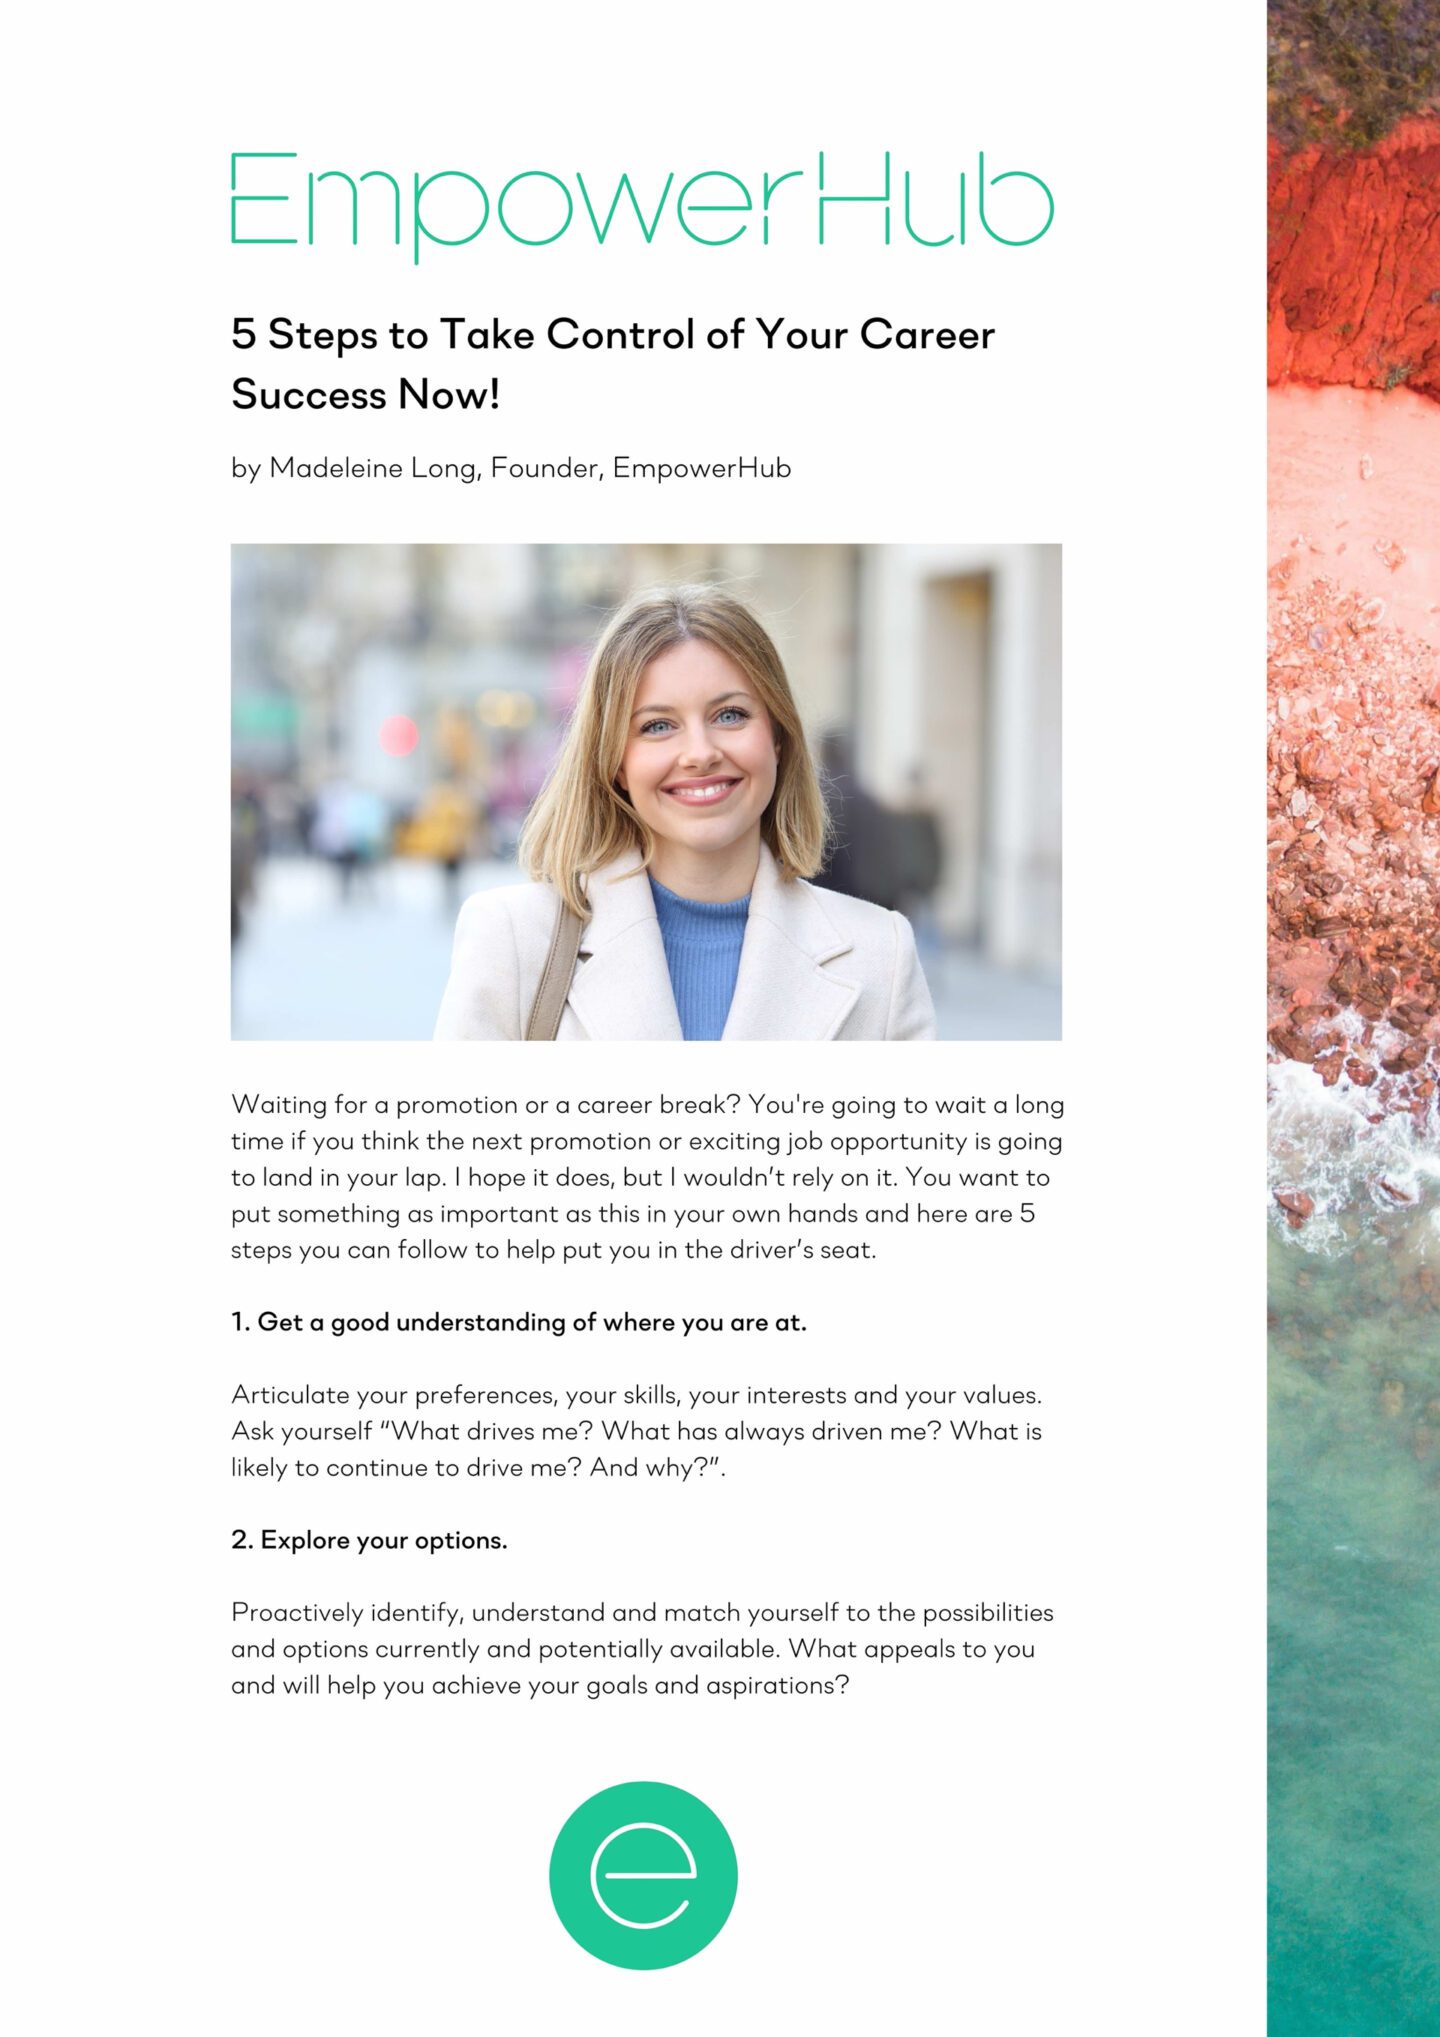 5 Steps To Take Control Of Your Career Success Now!